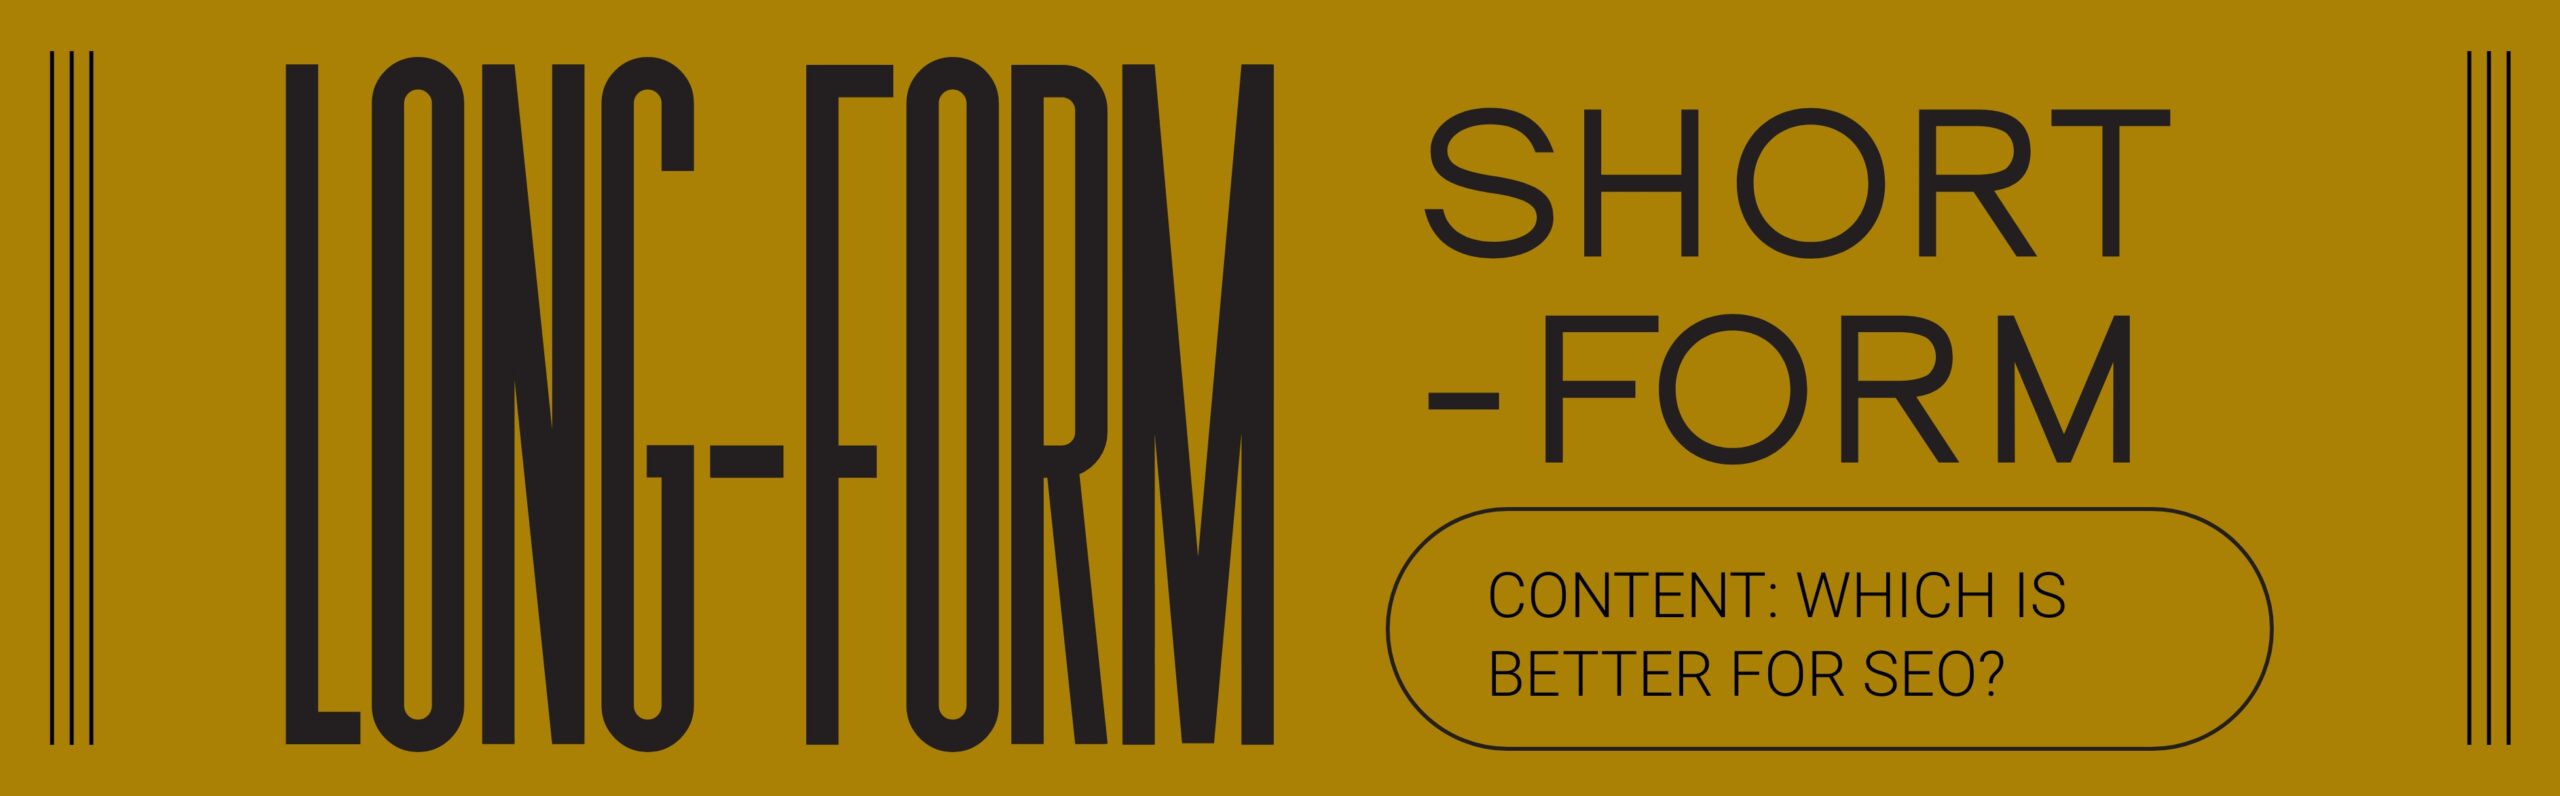 Short Form vs Long Form Content: Which Is Better for SEO?